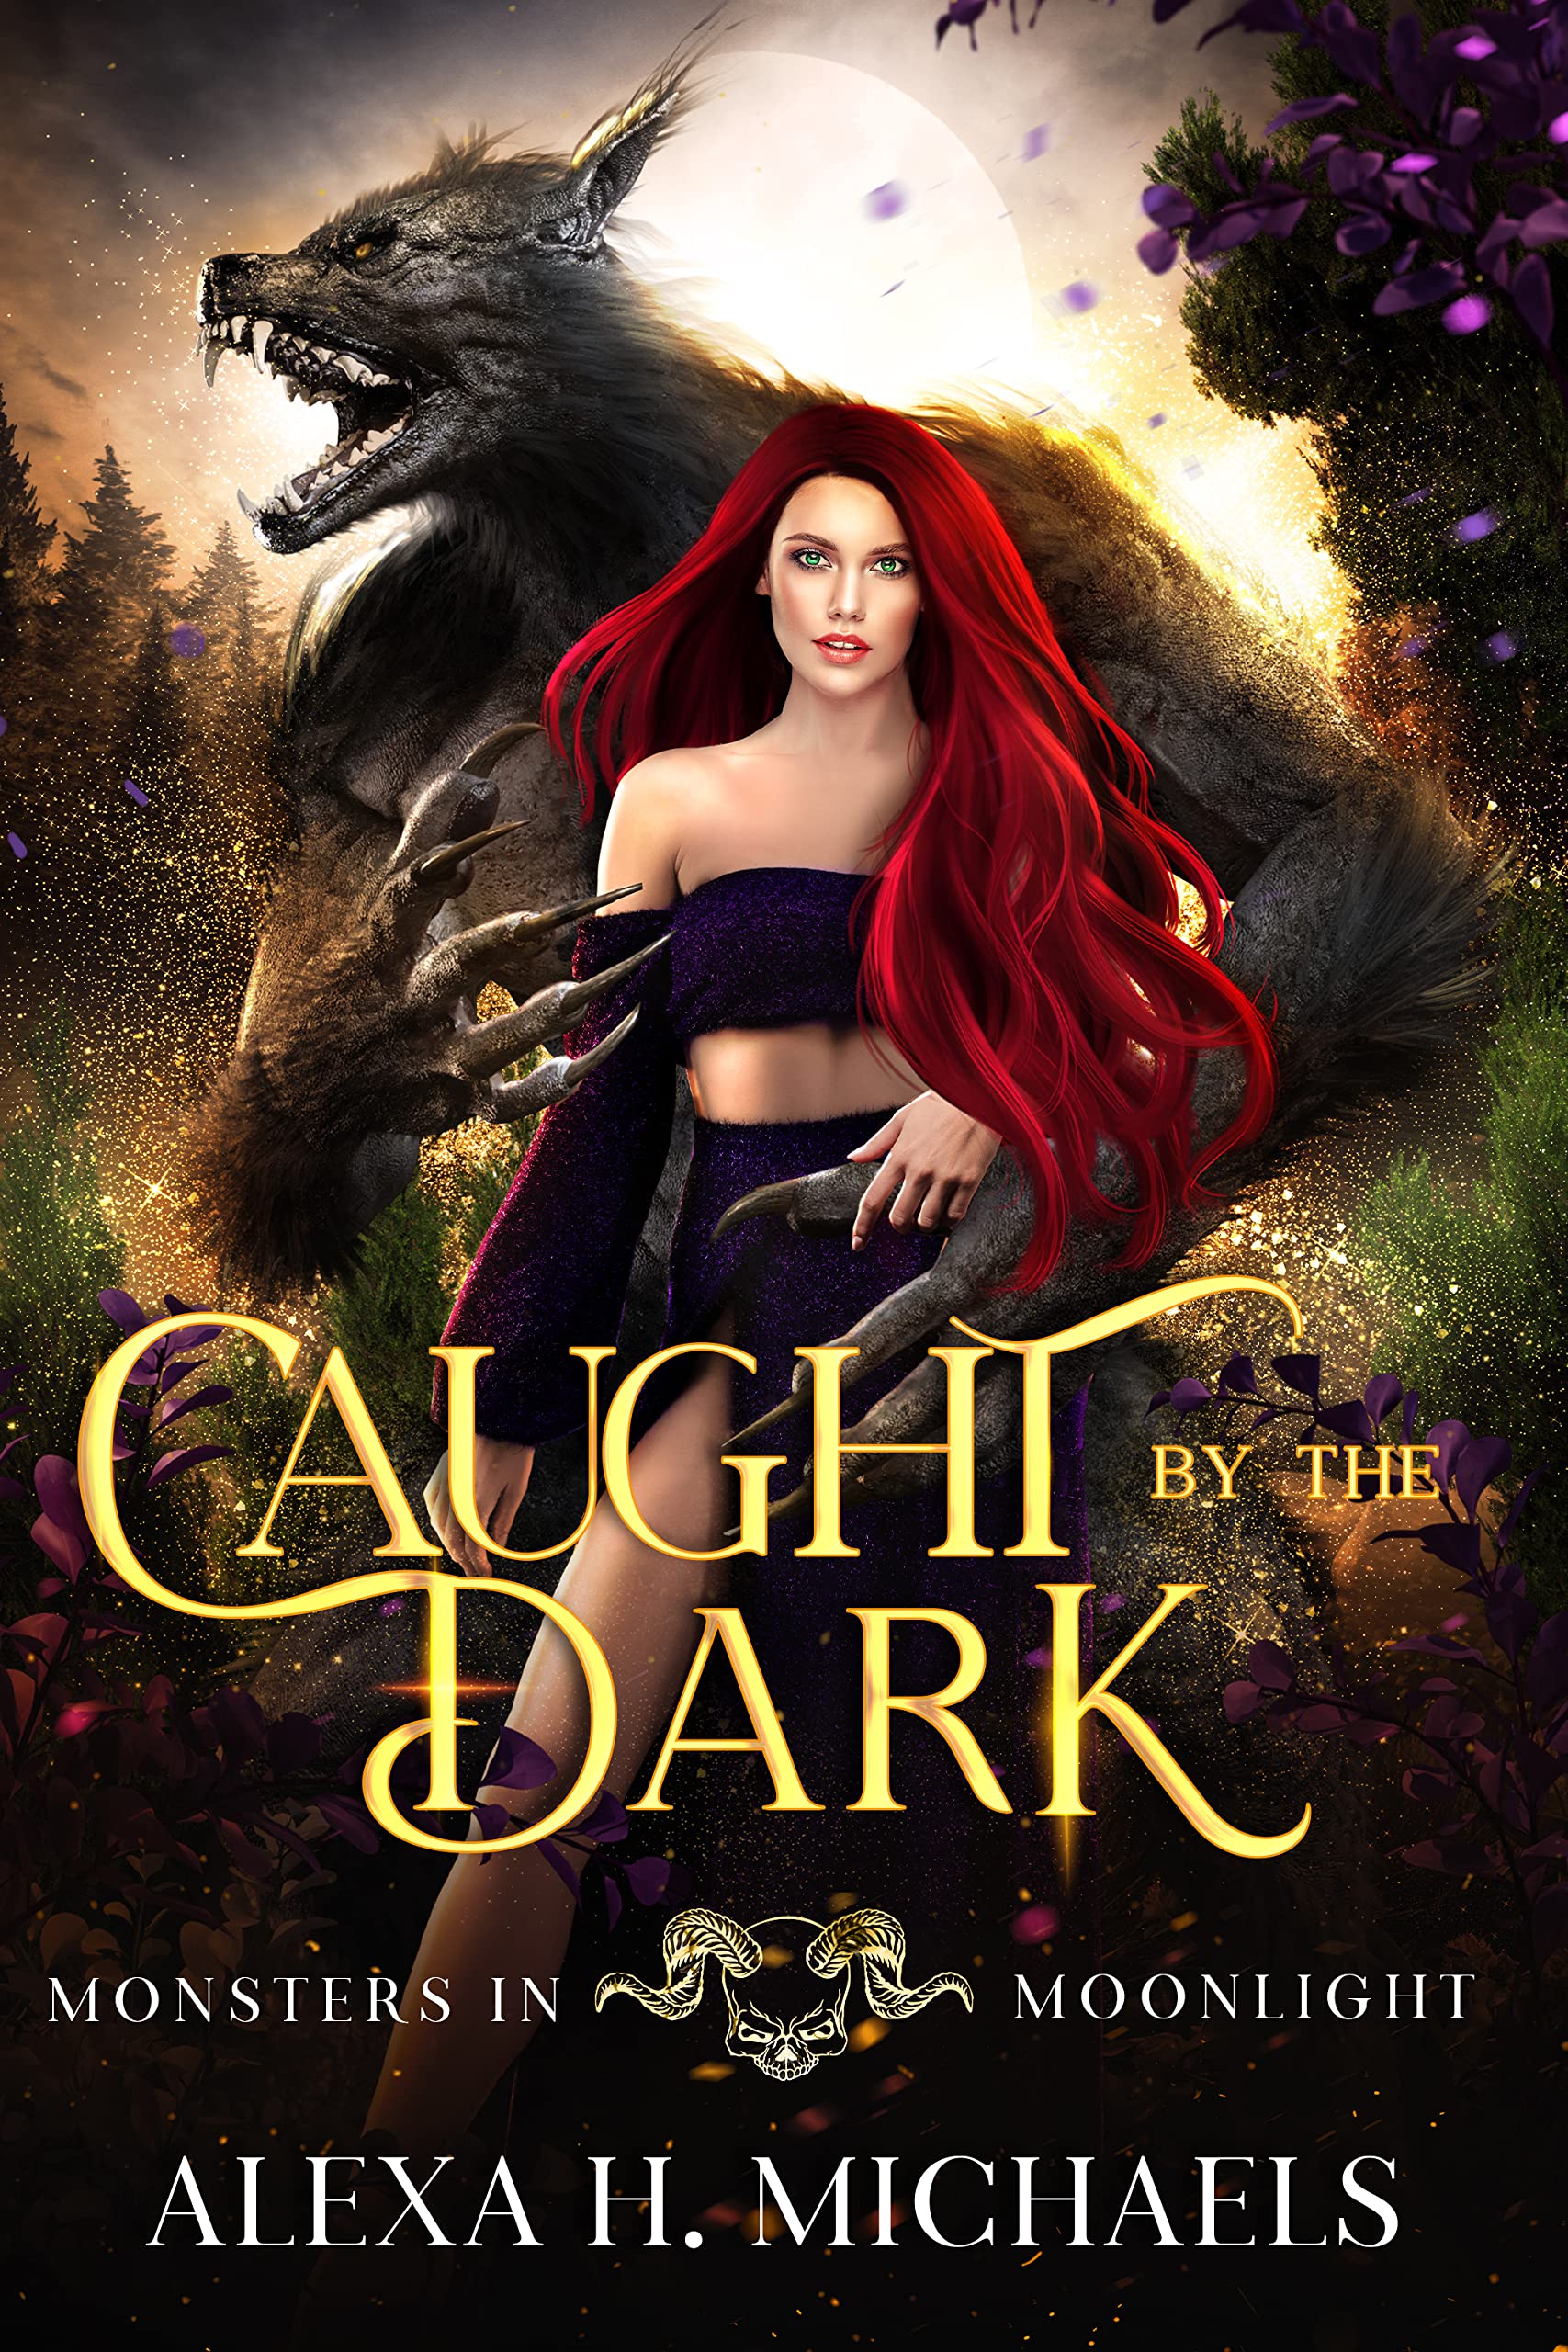 Caught By The Dark by Alexa H. Michaels PDF Download